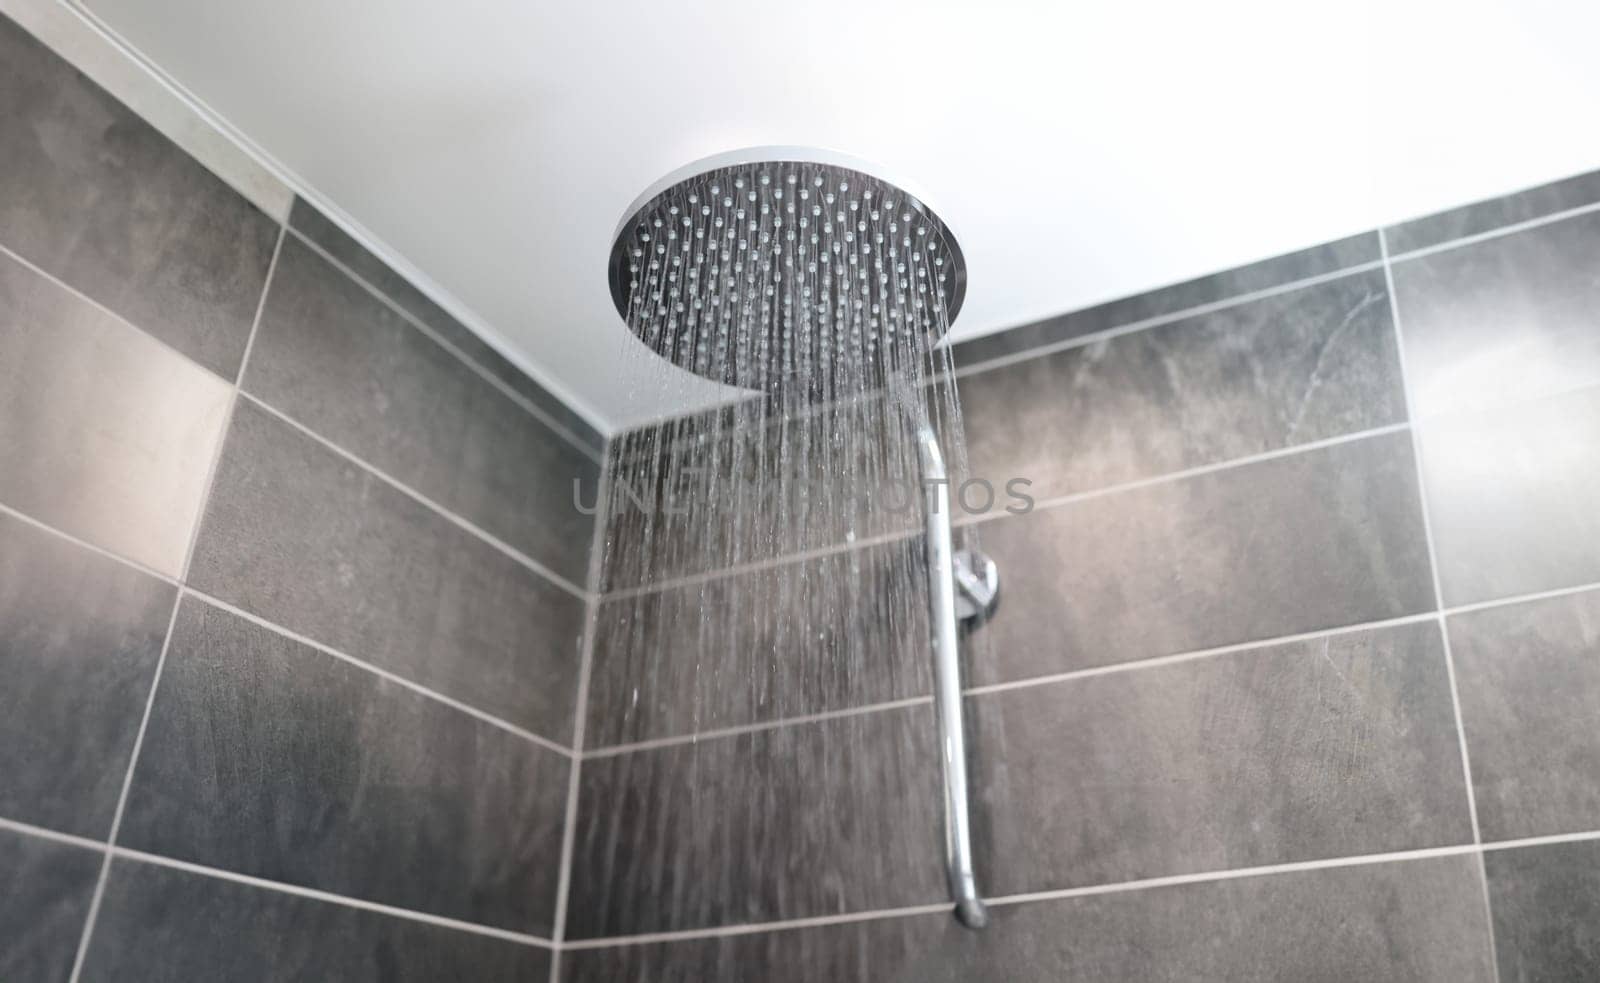 In bathroom, water flows from shower tap. Harm and benefits of cold shower in morning